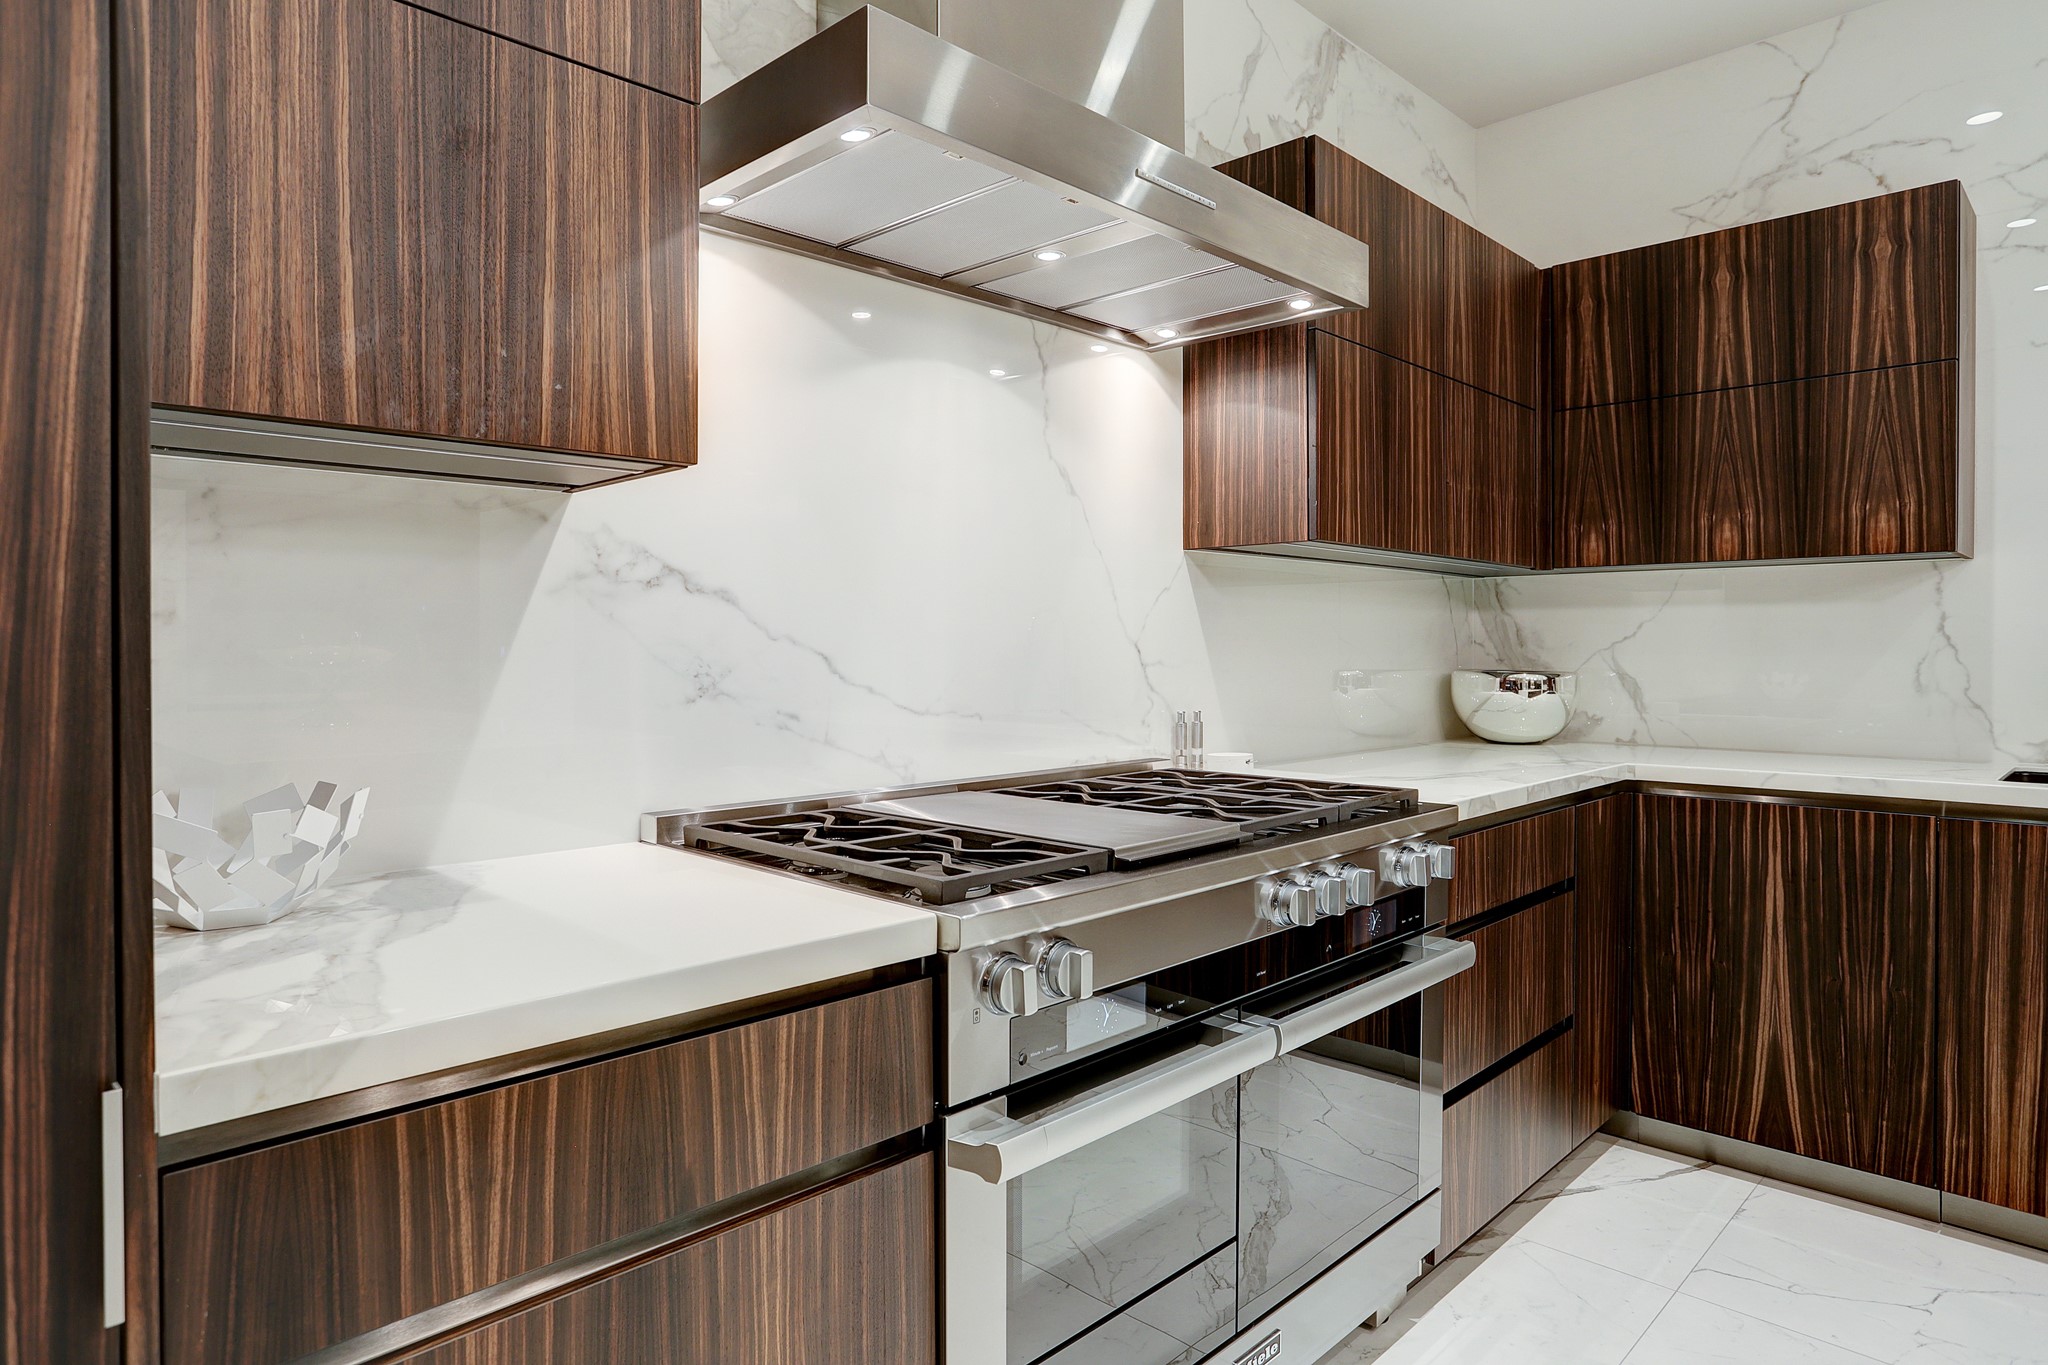 A closer view of the beautiful cabinetry, Neolith counters and stainless steel appliances.